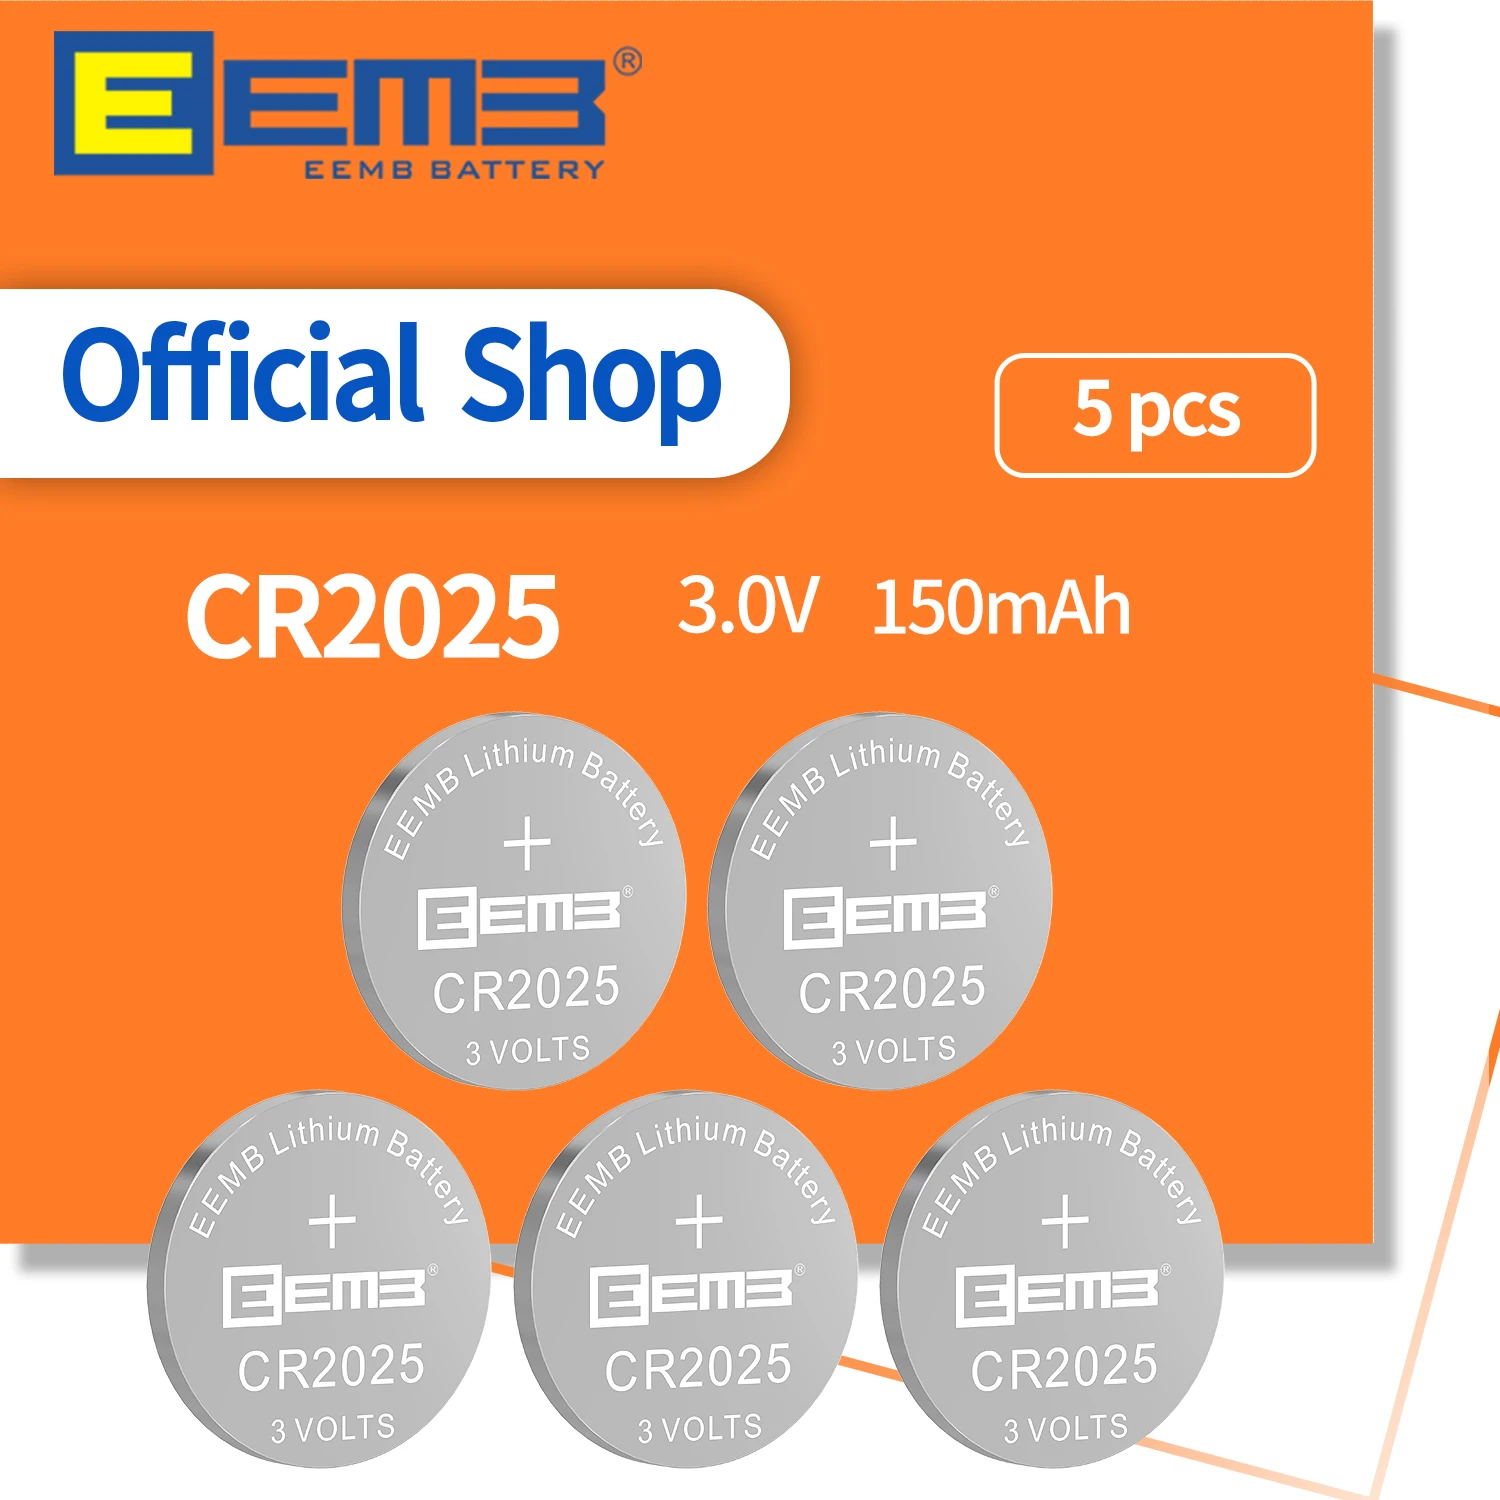 EEMB 5CS Button Battery CR2025 3V Lithium Batteries 150mAh Non-Rechargeable Coin Cell Battery for Watch Calculator Tablets Key